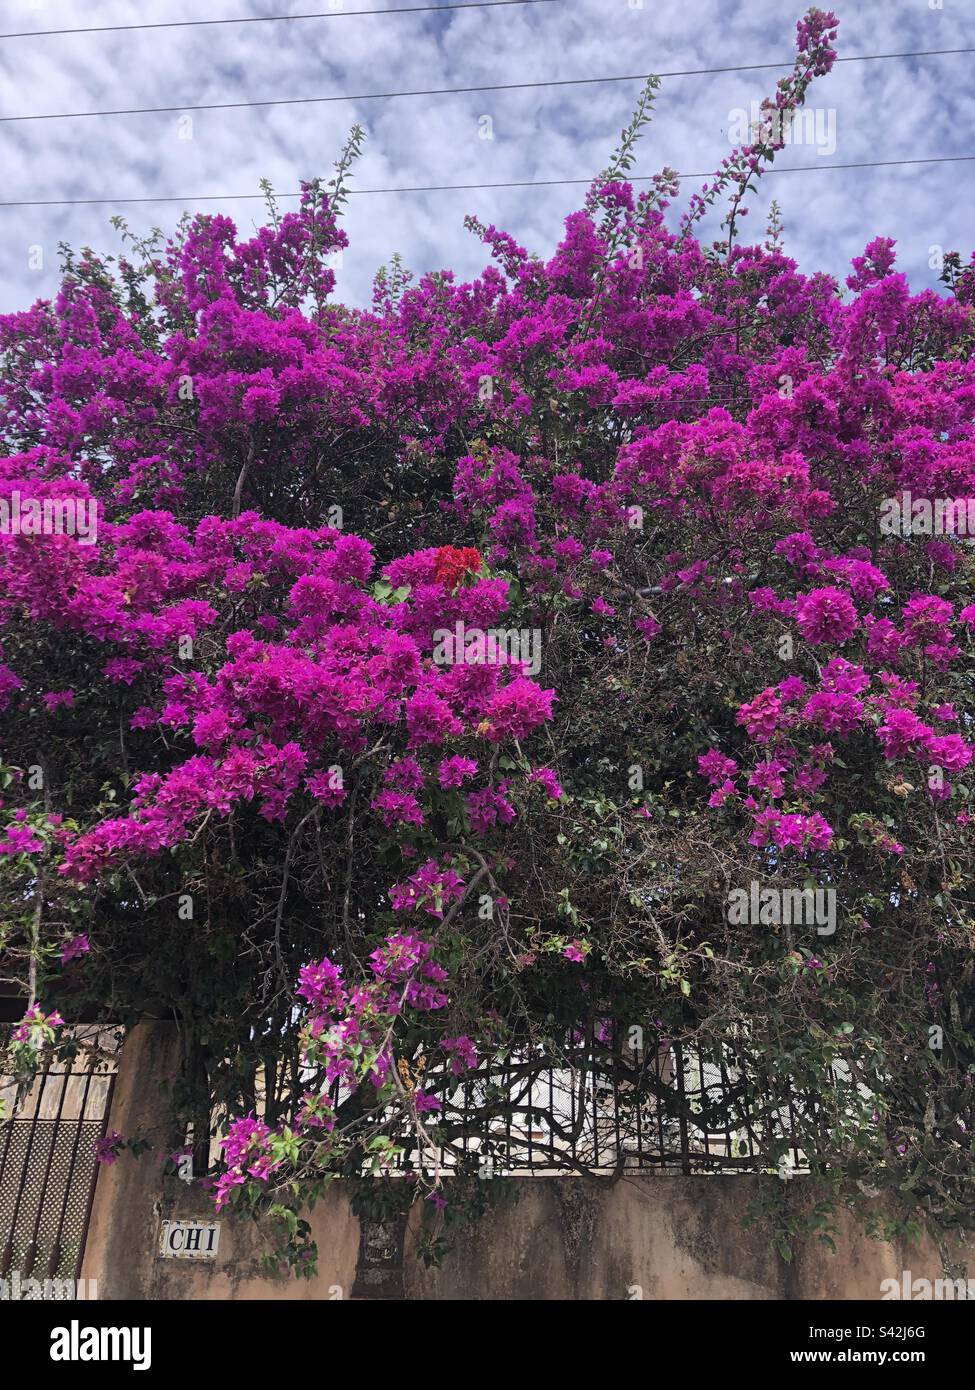 Bright magenta blooms on a flowering tree. Stock Photo